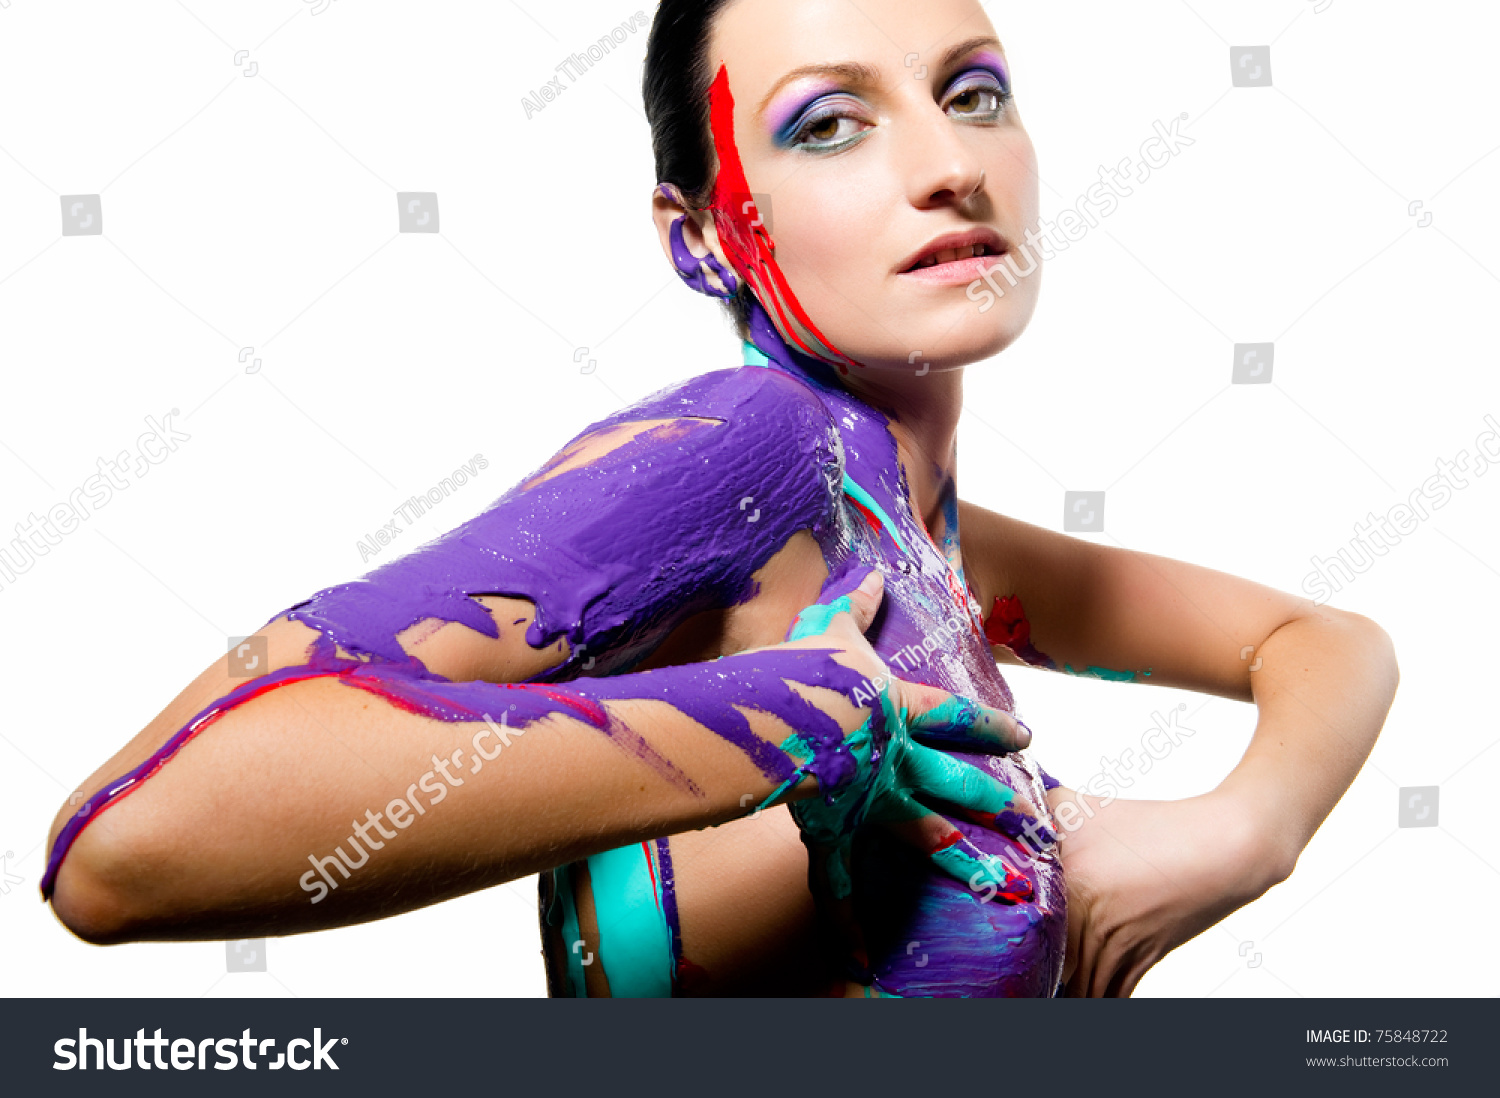 aakash chand recommends women body painting images pic